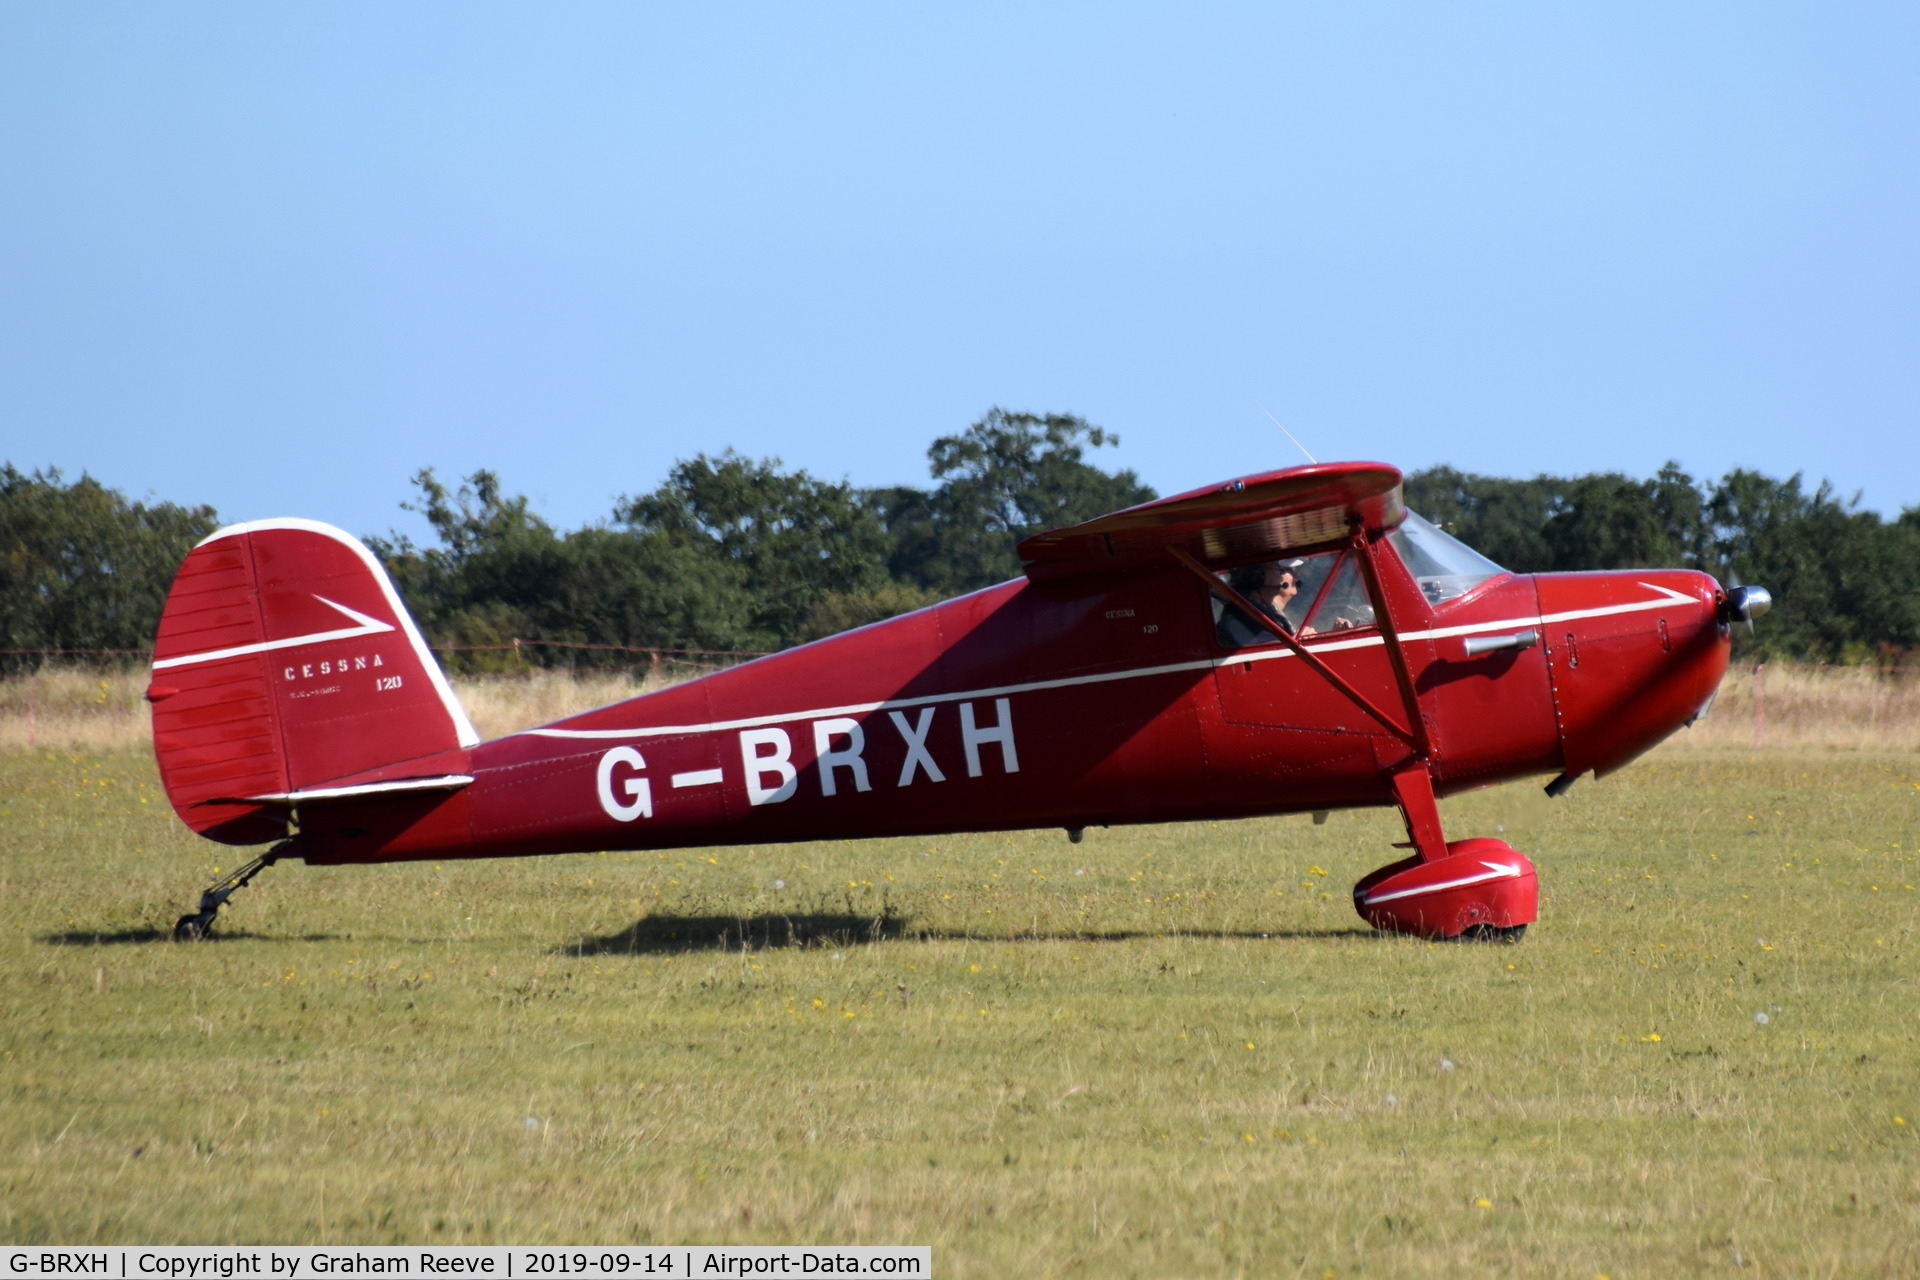 G-BRXH, 1946 Cessna 120 C/N 10462, Just landed at, Bury St Edmunds, Rougham Airfield, UK.